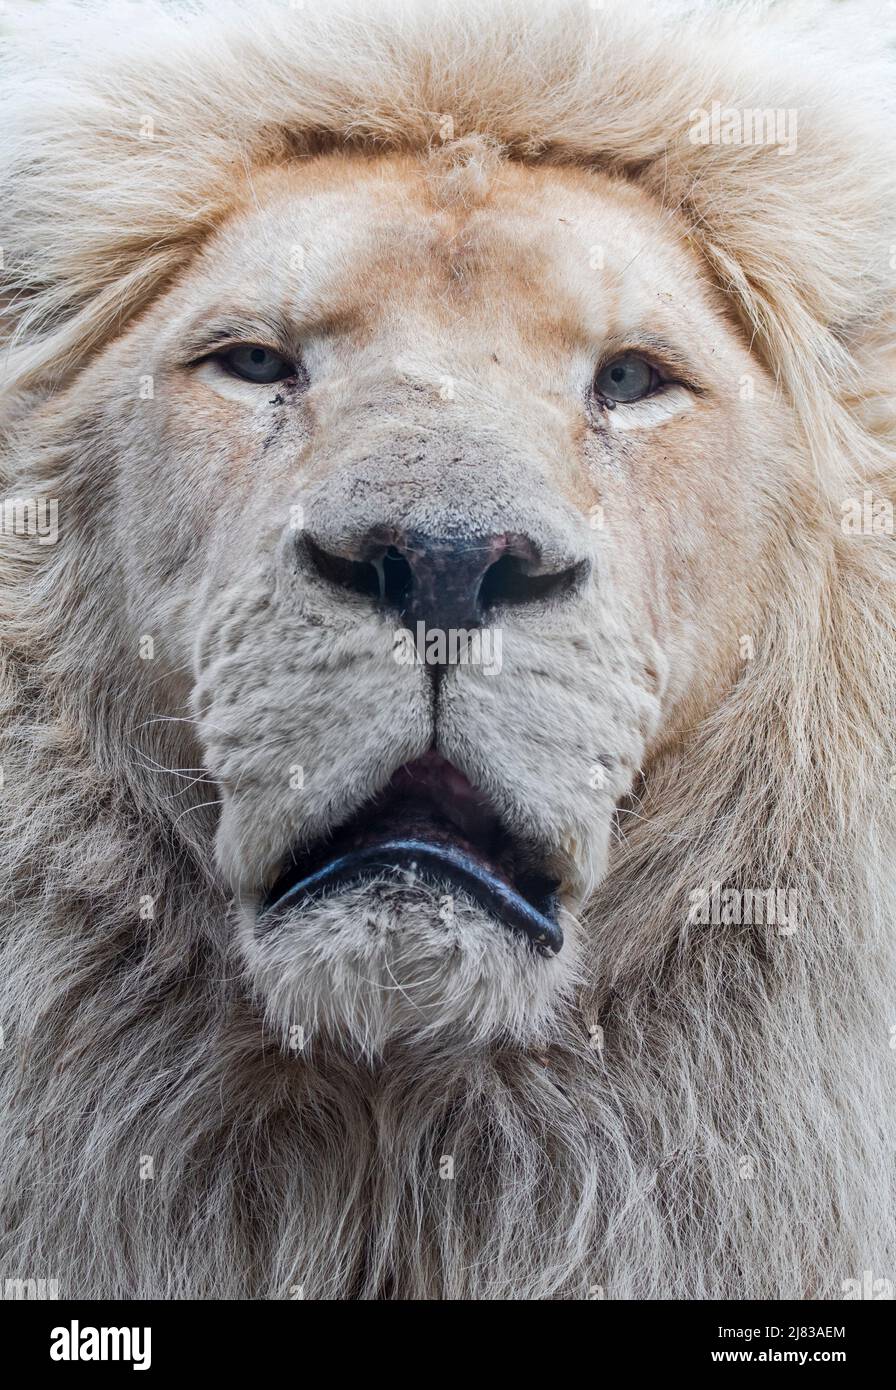 Male leucistic white lion (Panthera leo krugeri) rare morph with a genetic condition called leucism that is caused by a double recessive allele Stock Photo